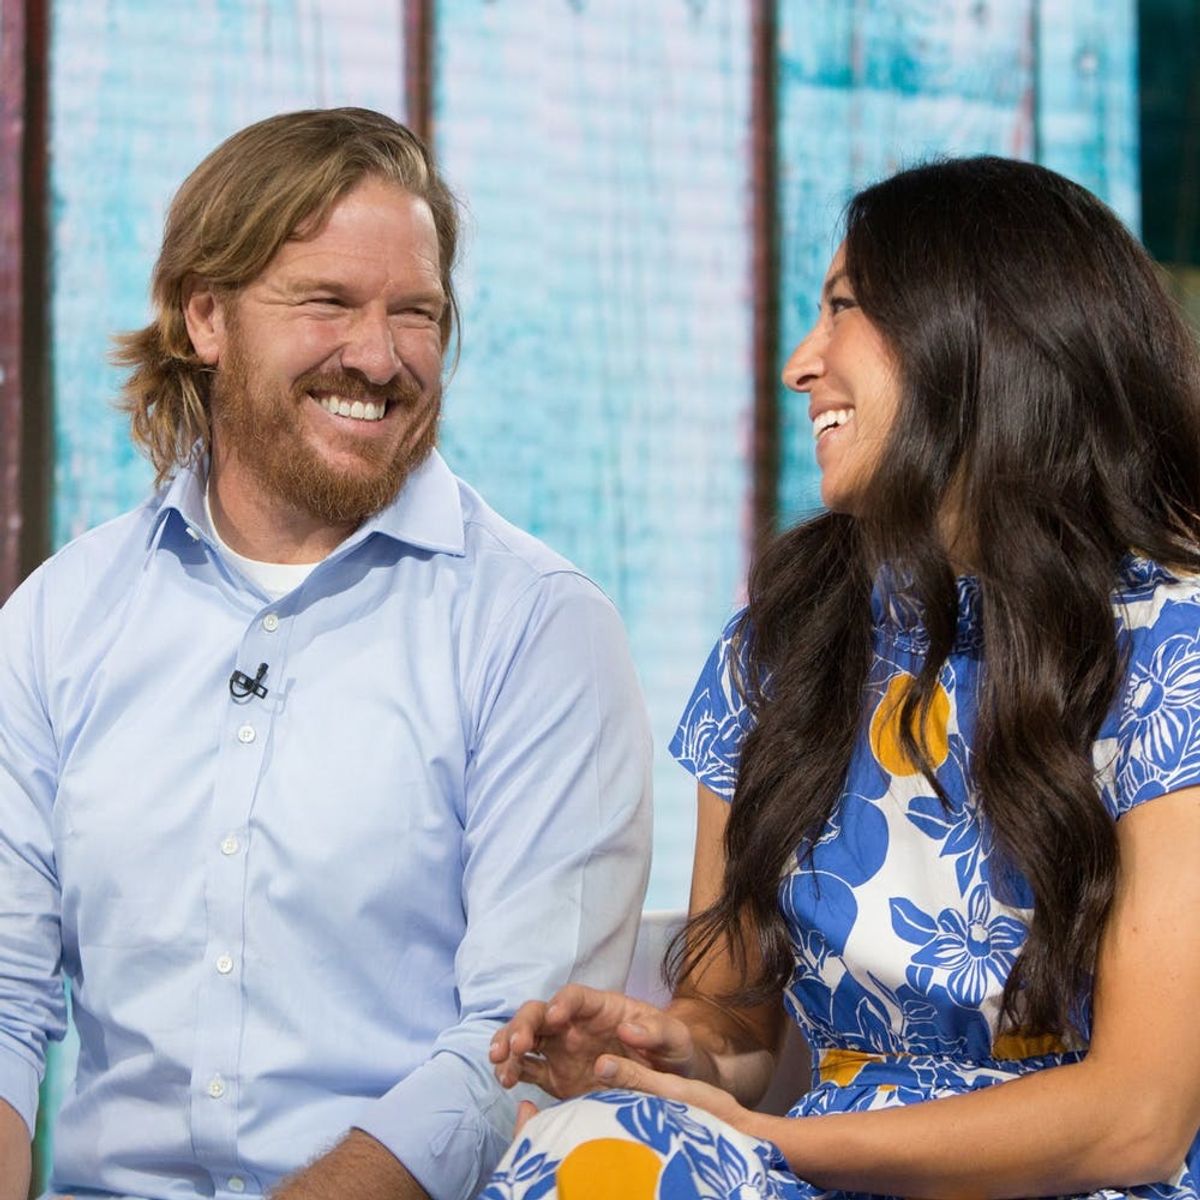 The Reason Why Chip Gaines Shaved His Signature Long Hair Will Make You Weep